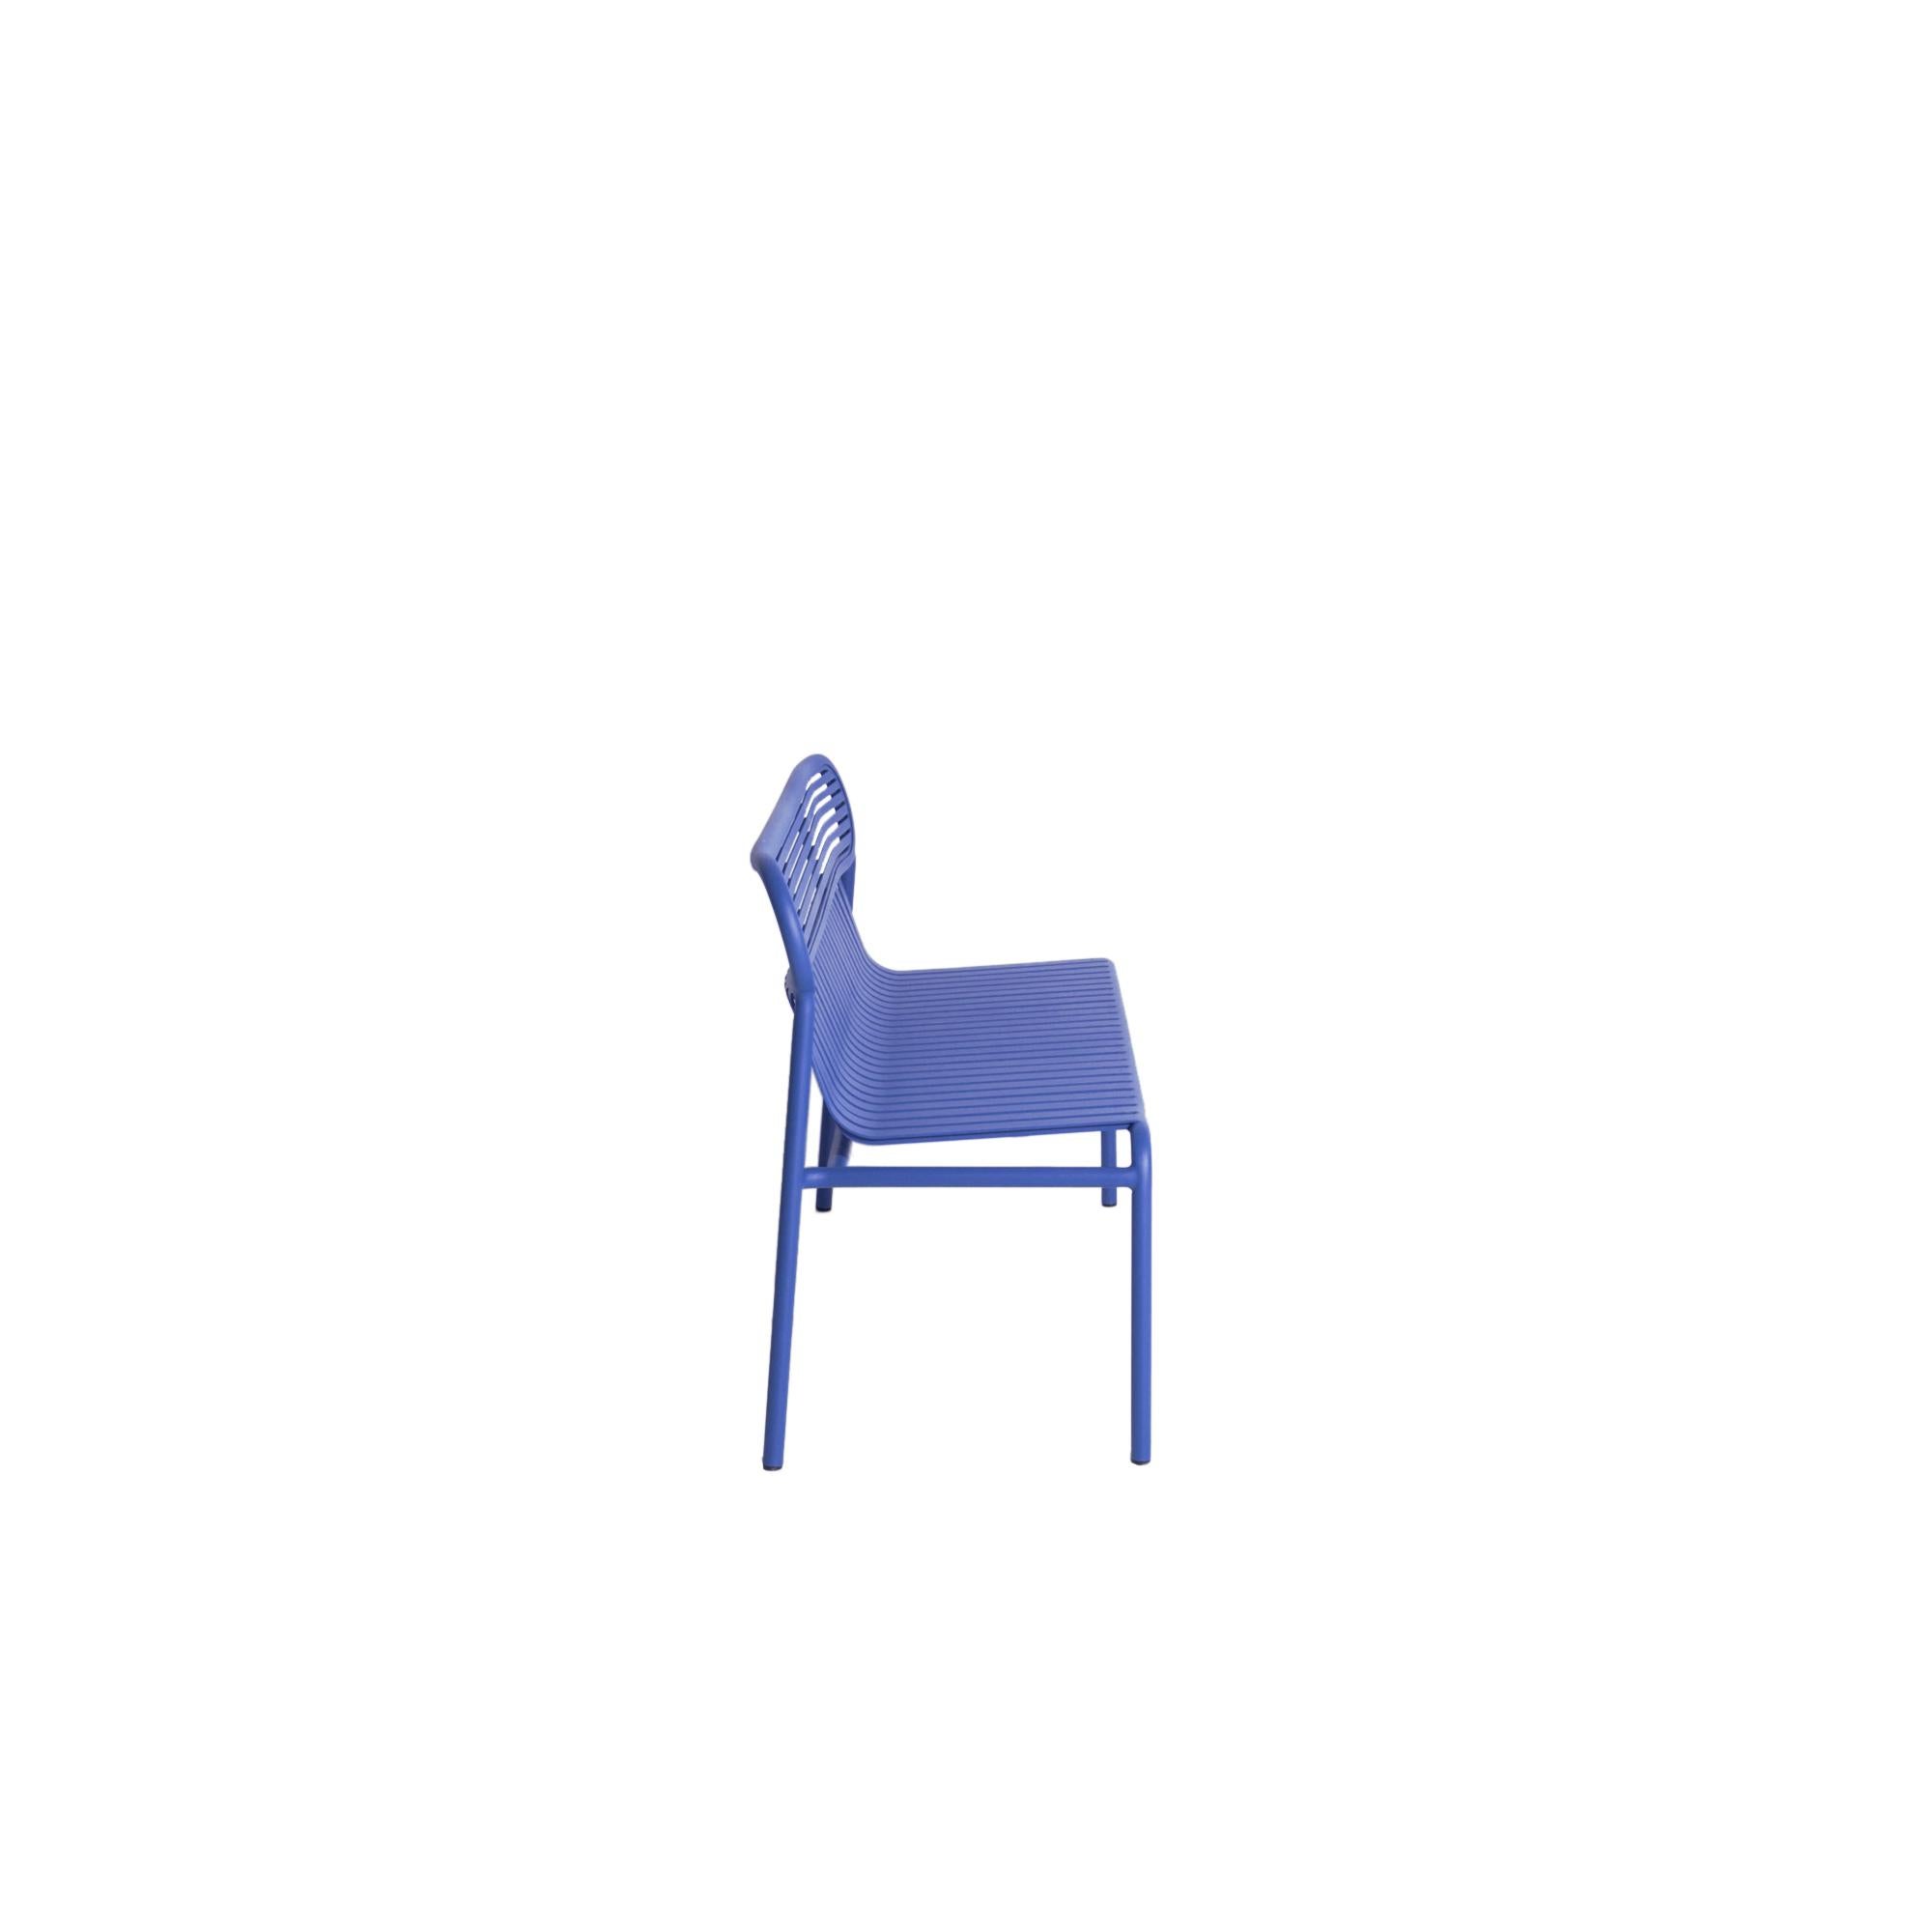 Chinese Petite Friture Week-End Bench in Blue Aluminium by Studio BrichetZiegler For Sale